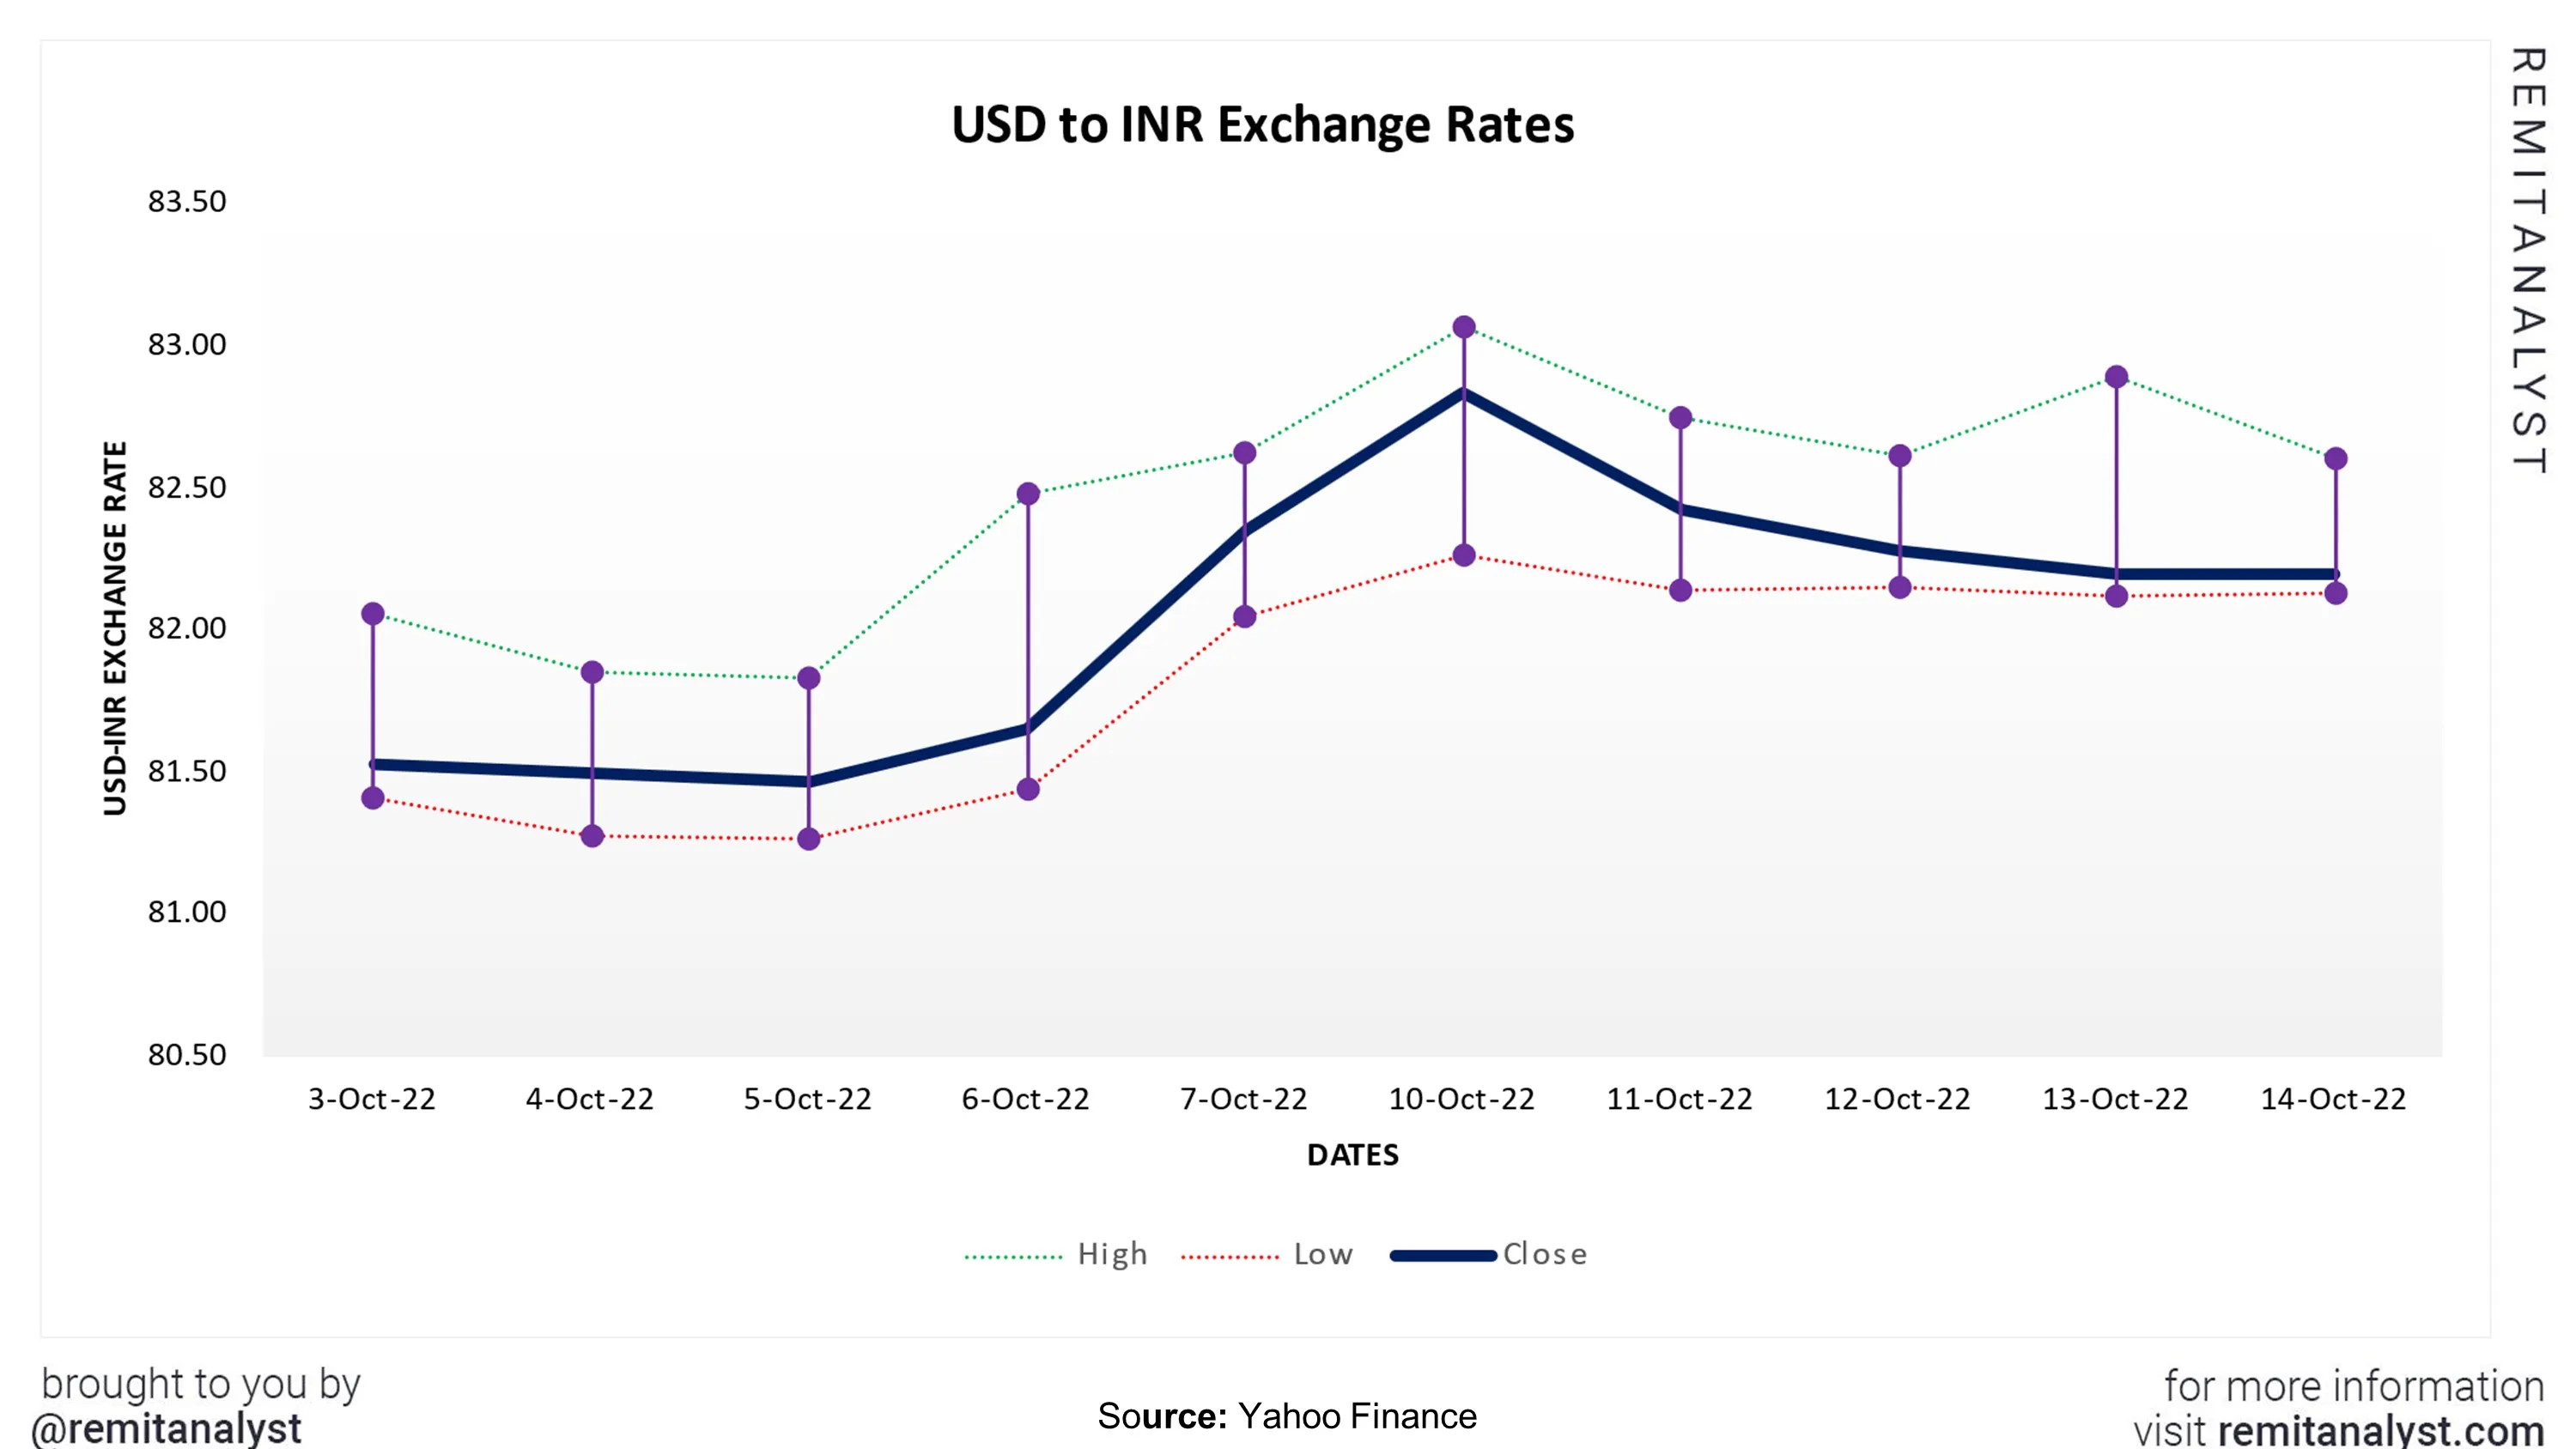 USD-to-INR-Exchange-Rate-from-3-oct-2022-to-14-oct-2022